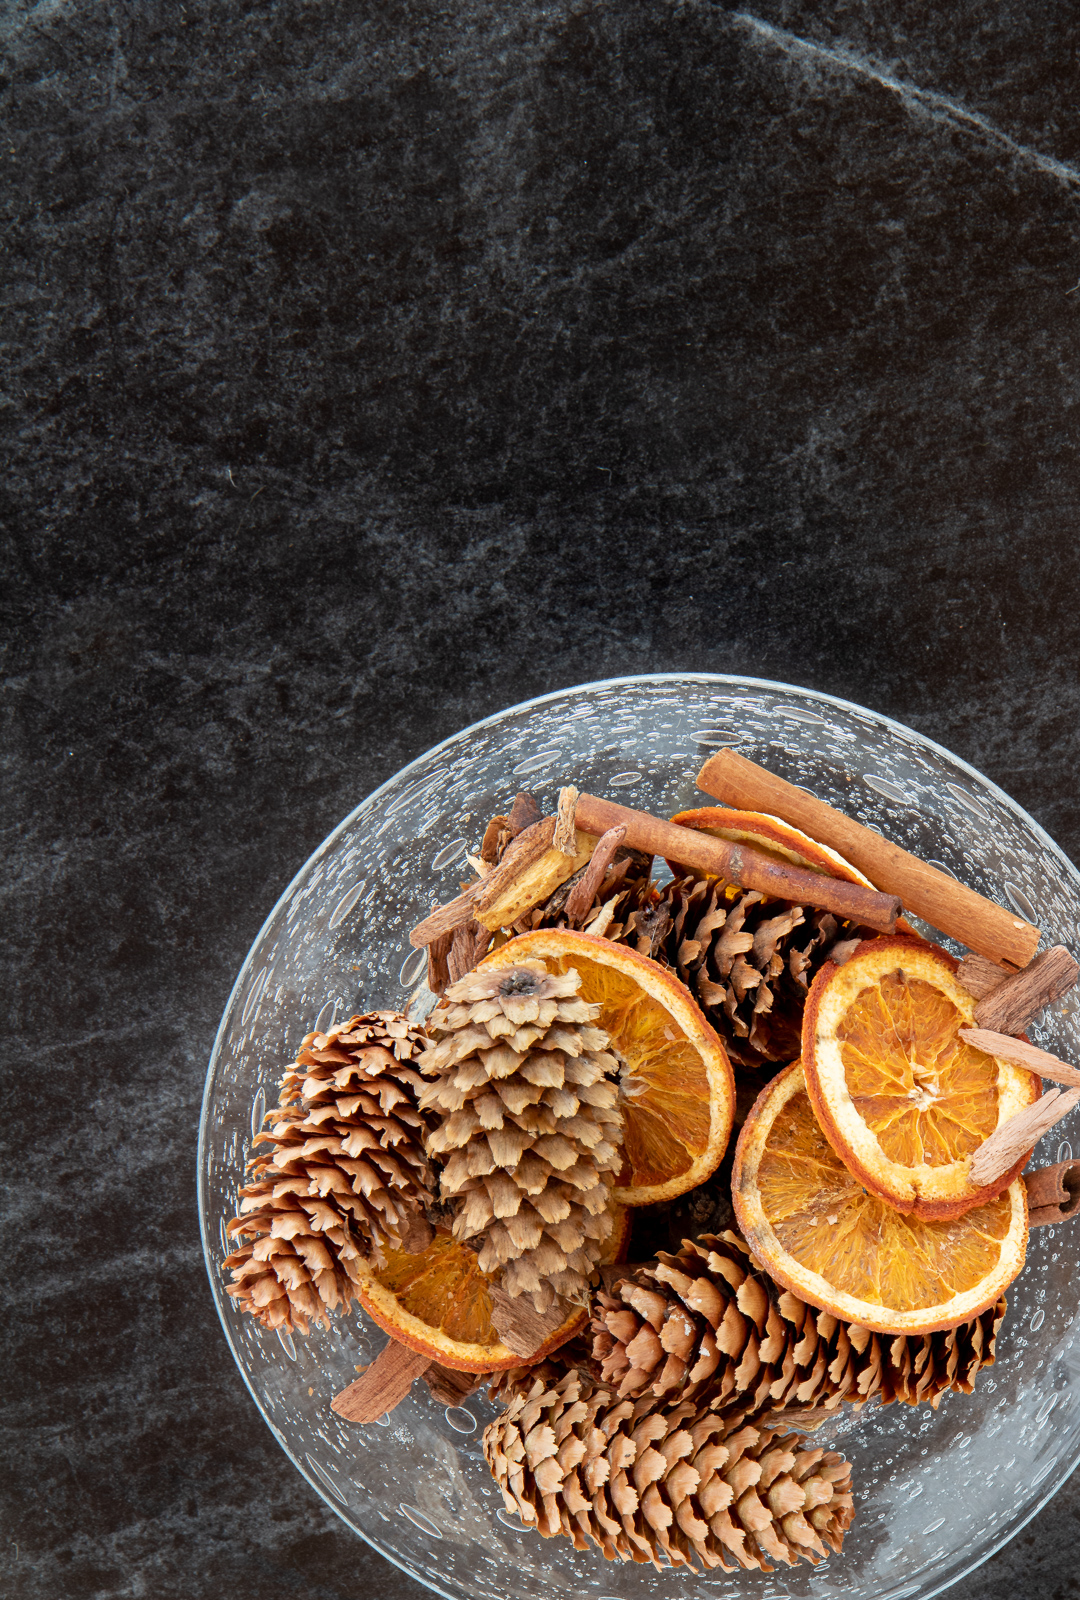 Save money making your own holiday potpourri